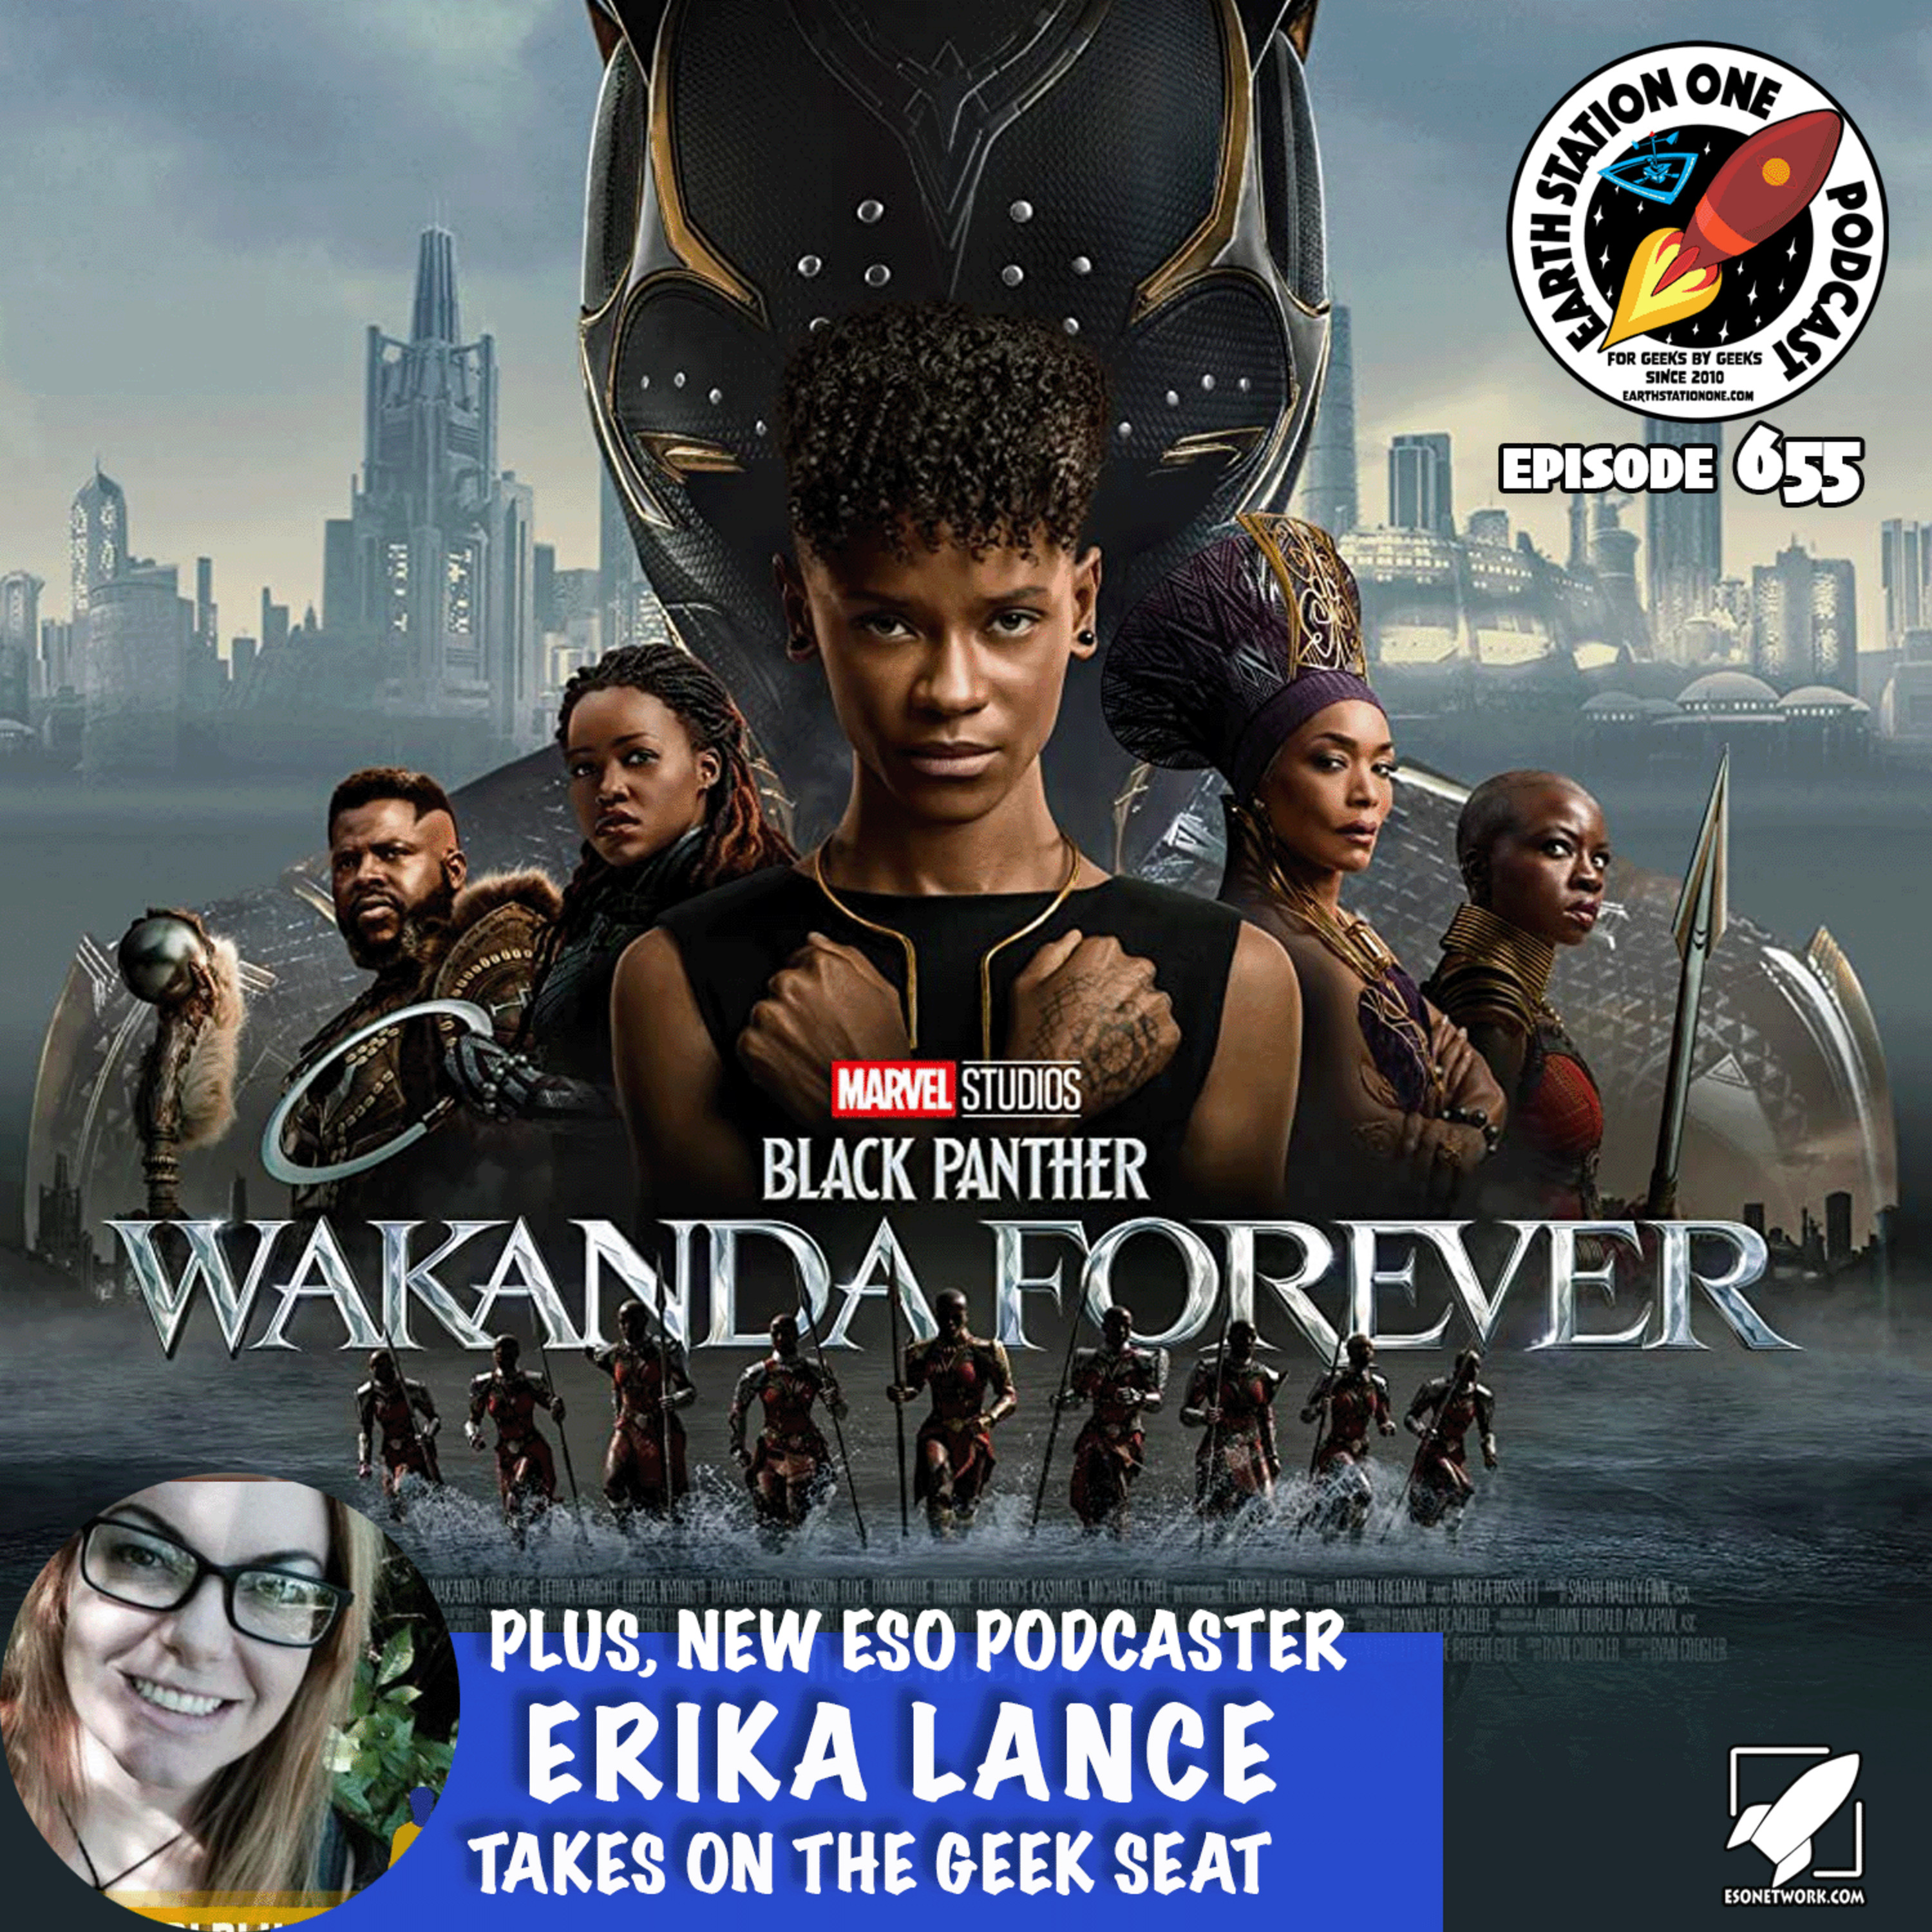 The Earth Station One Podcaster  - Black Panther: Wakanda Forever